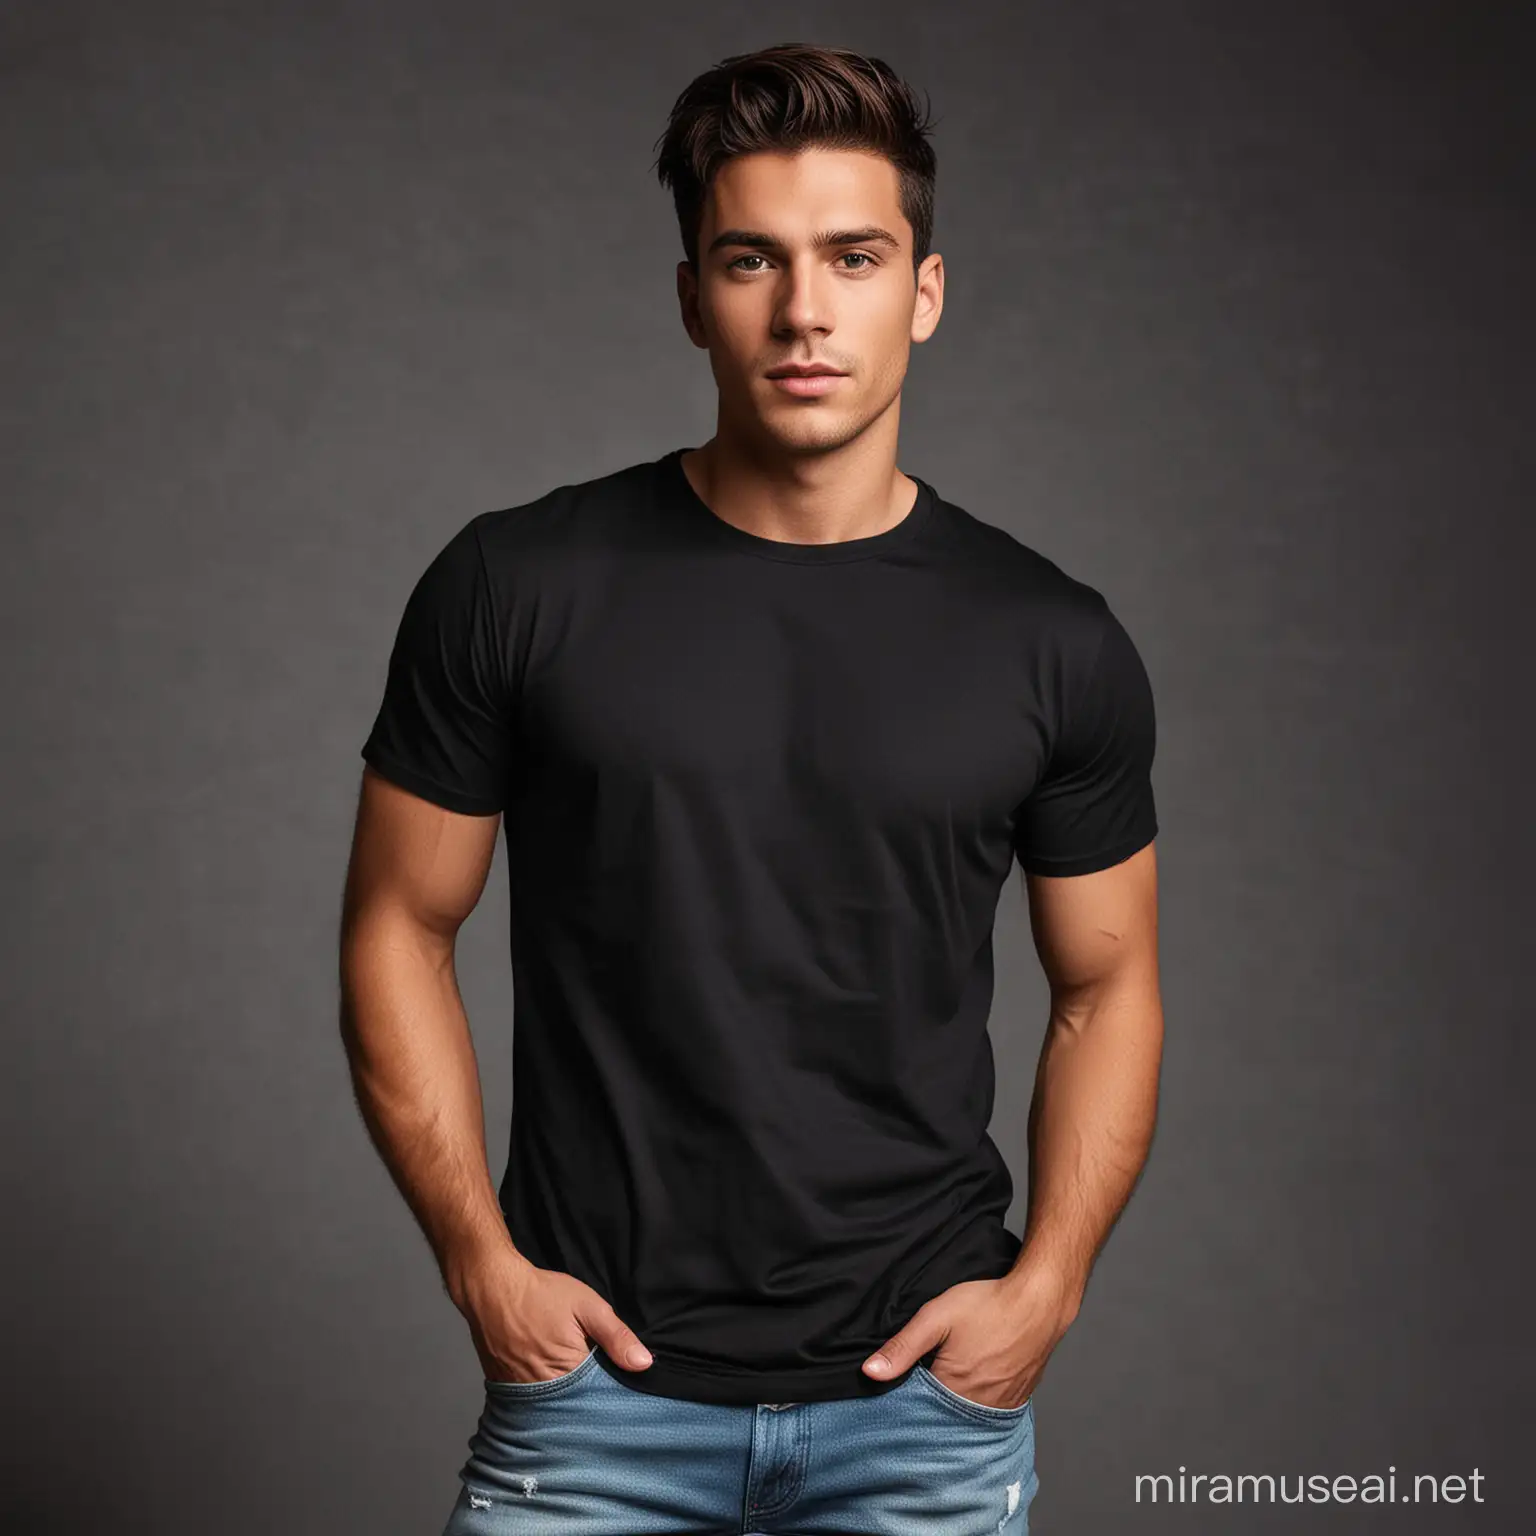 Create me male models wearing black t-shirts with backgrounds